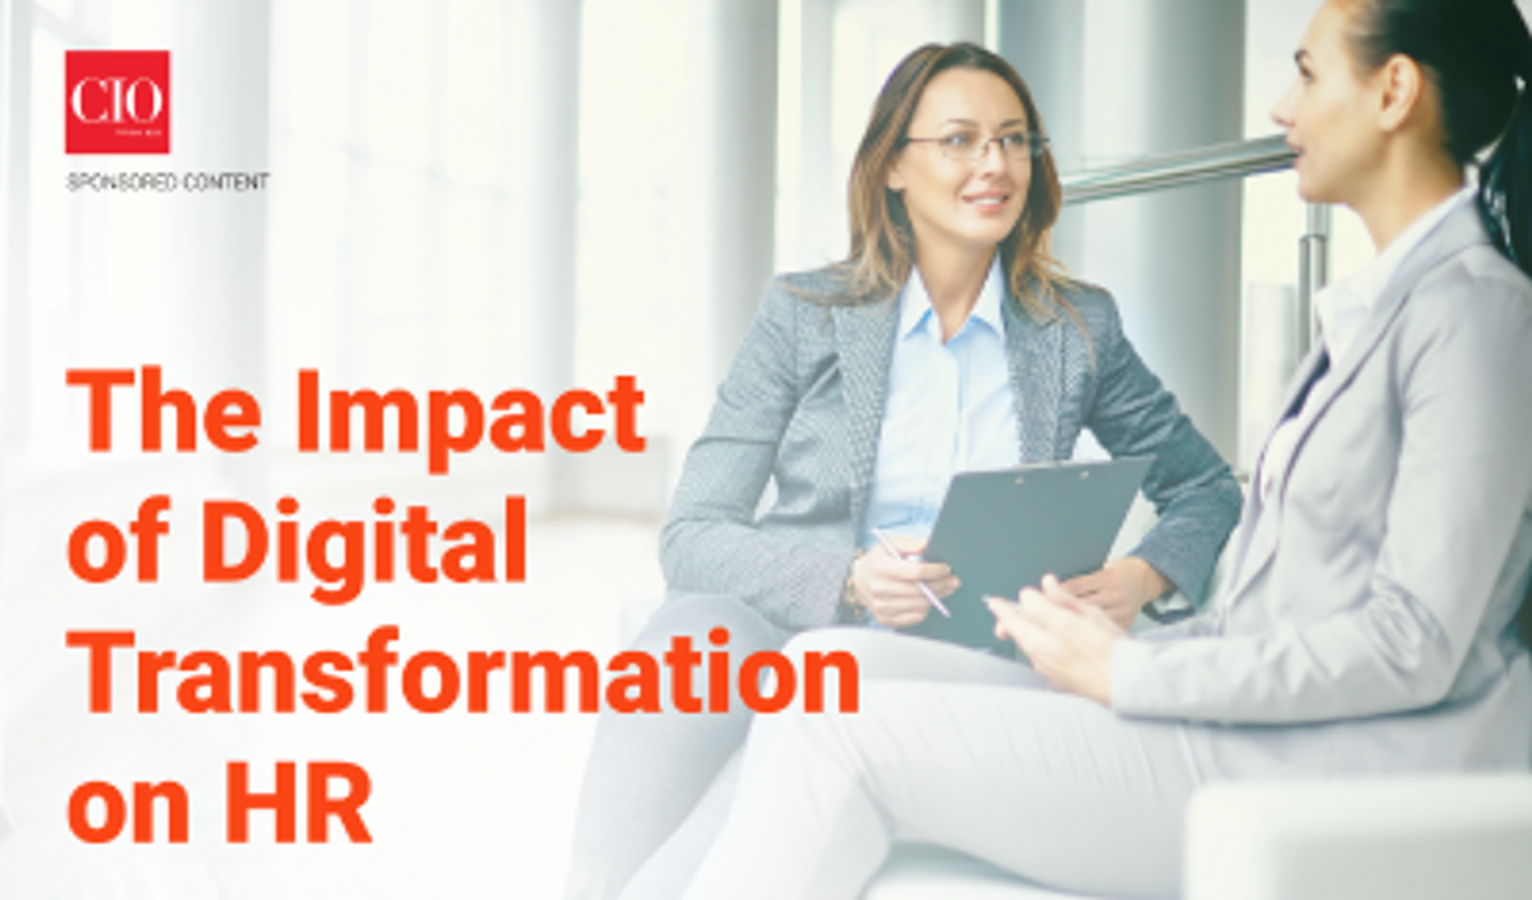 The impact of digital transformation on HR